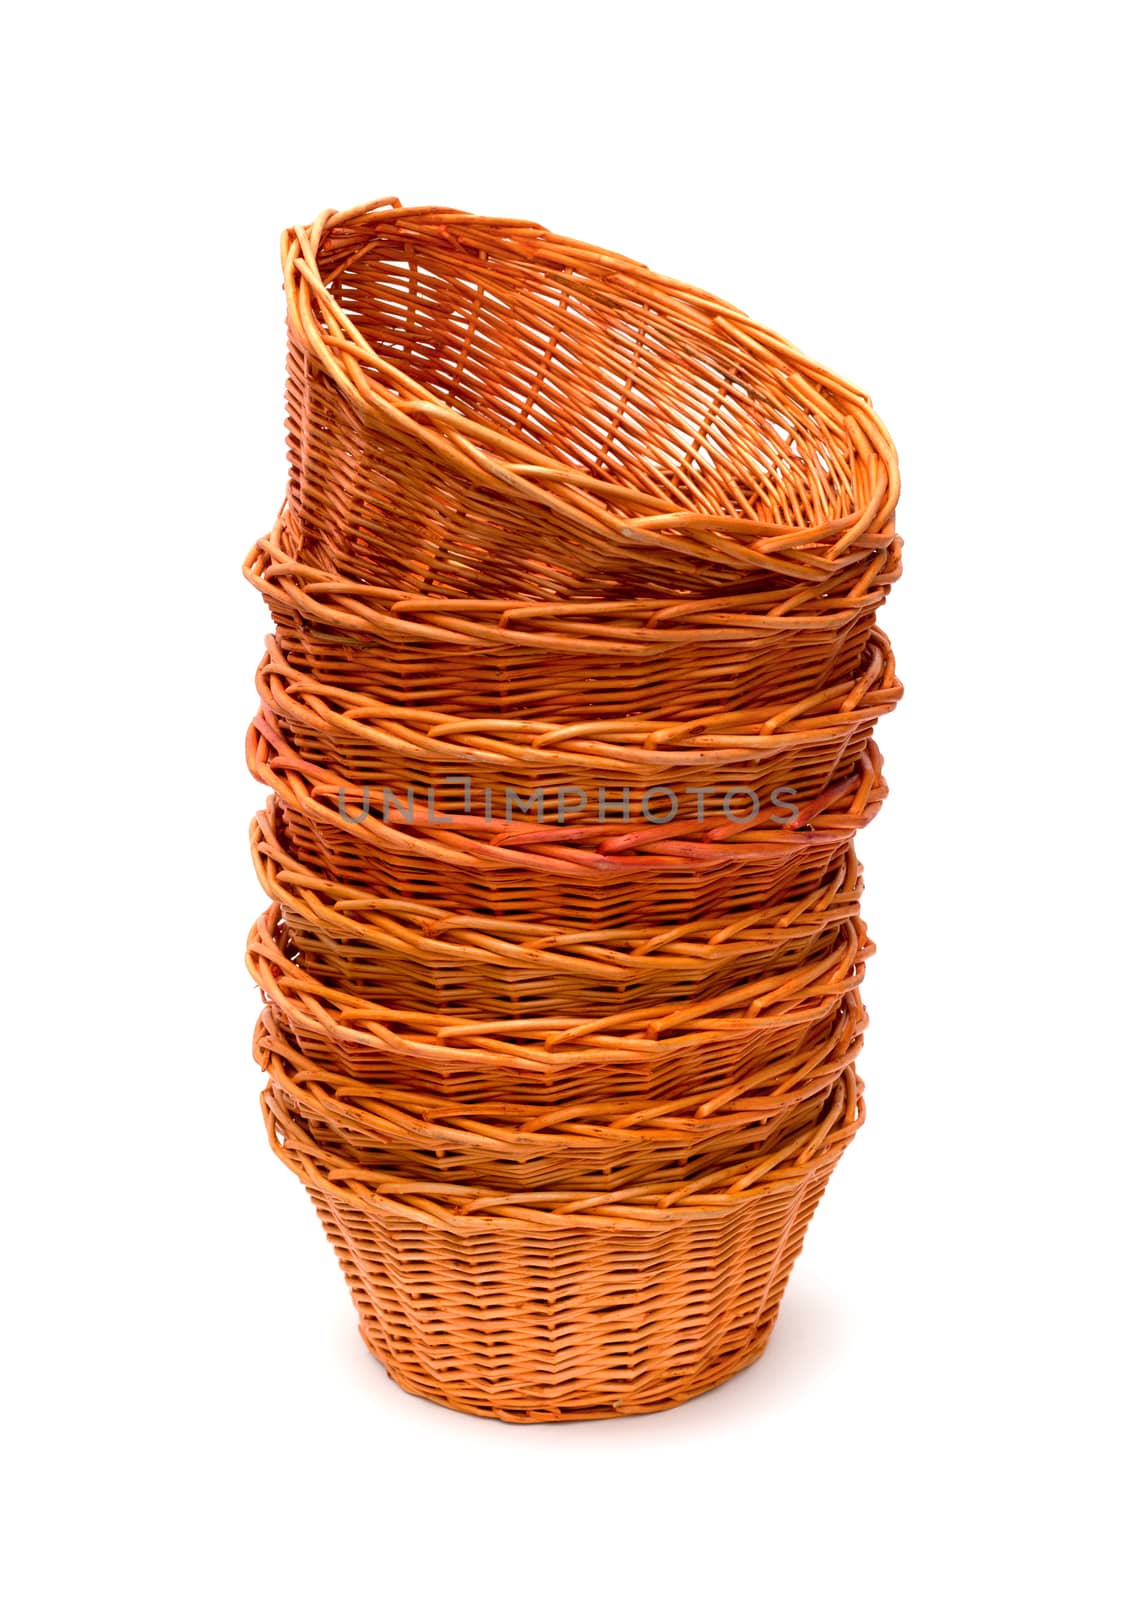 Empty basket isolated on white background by DNKSTUDIO